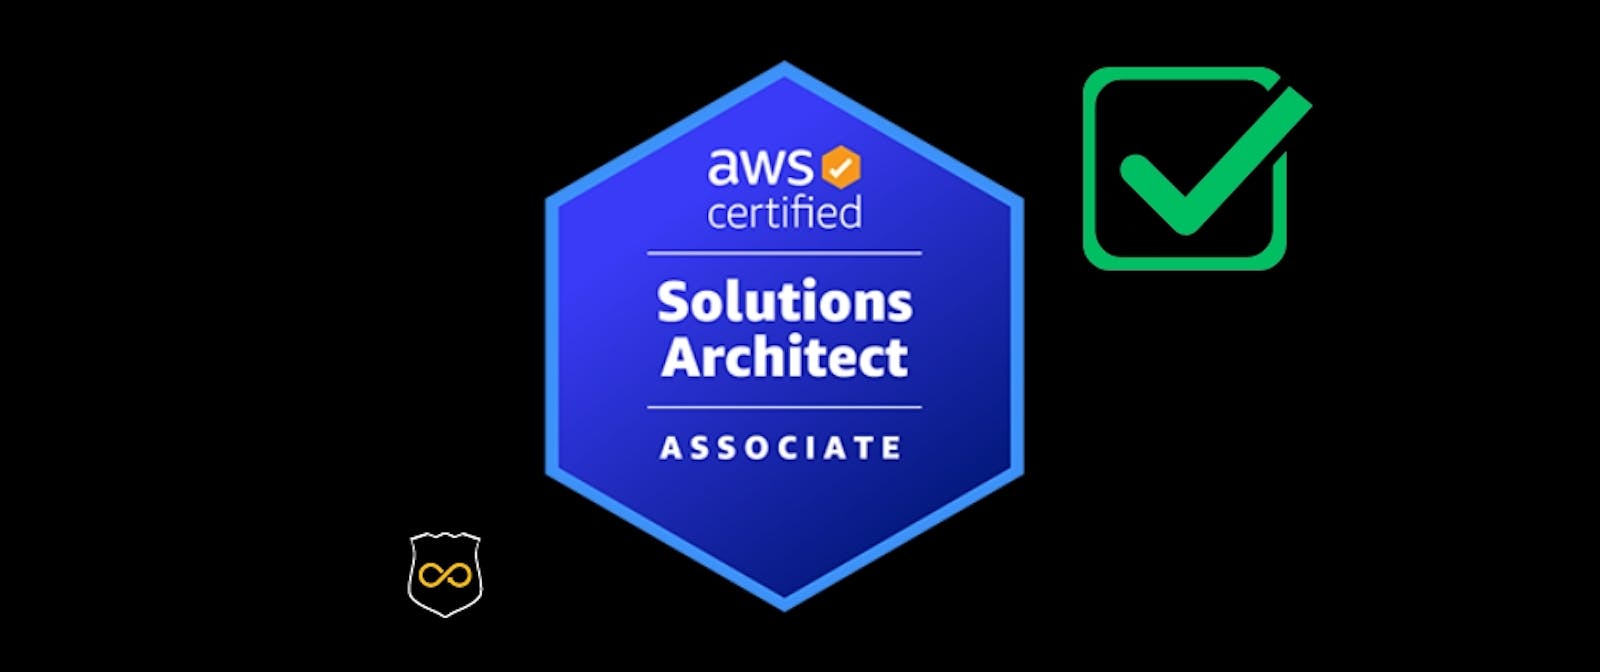 My Journey to Passing the AWS Certified Solutions Architect Associate Exam